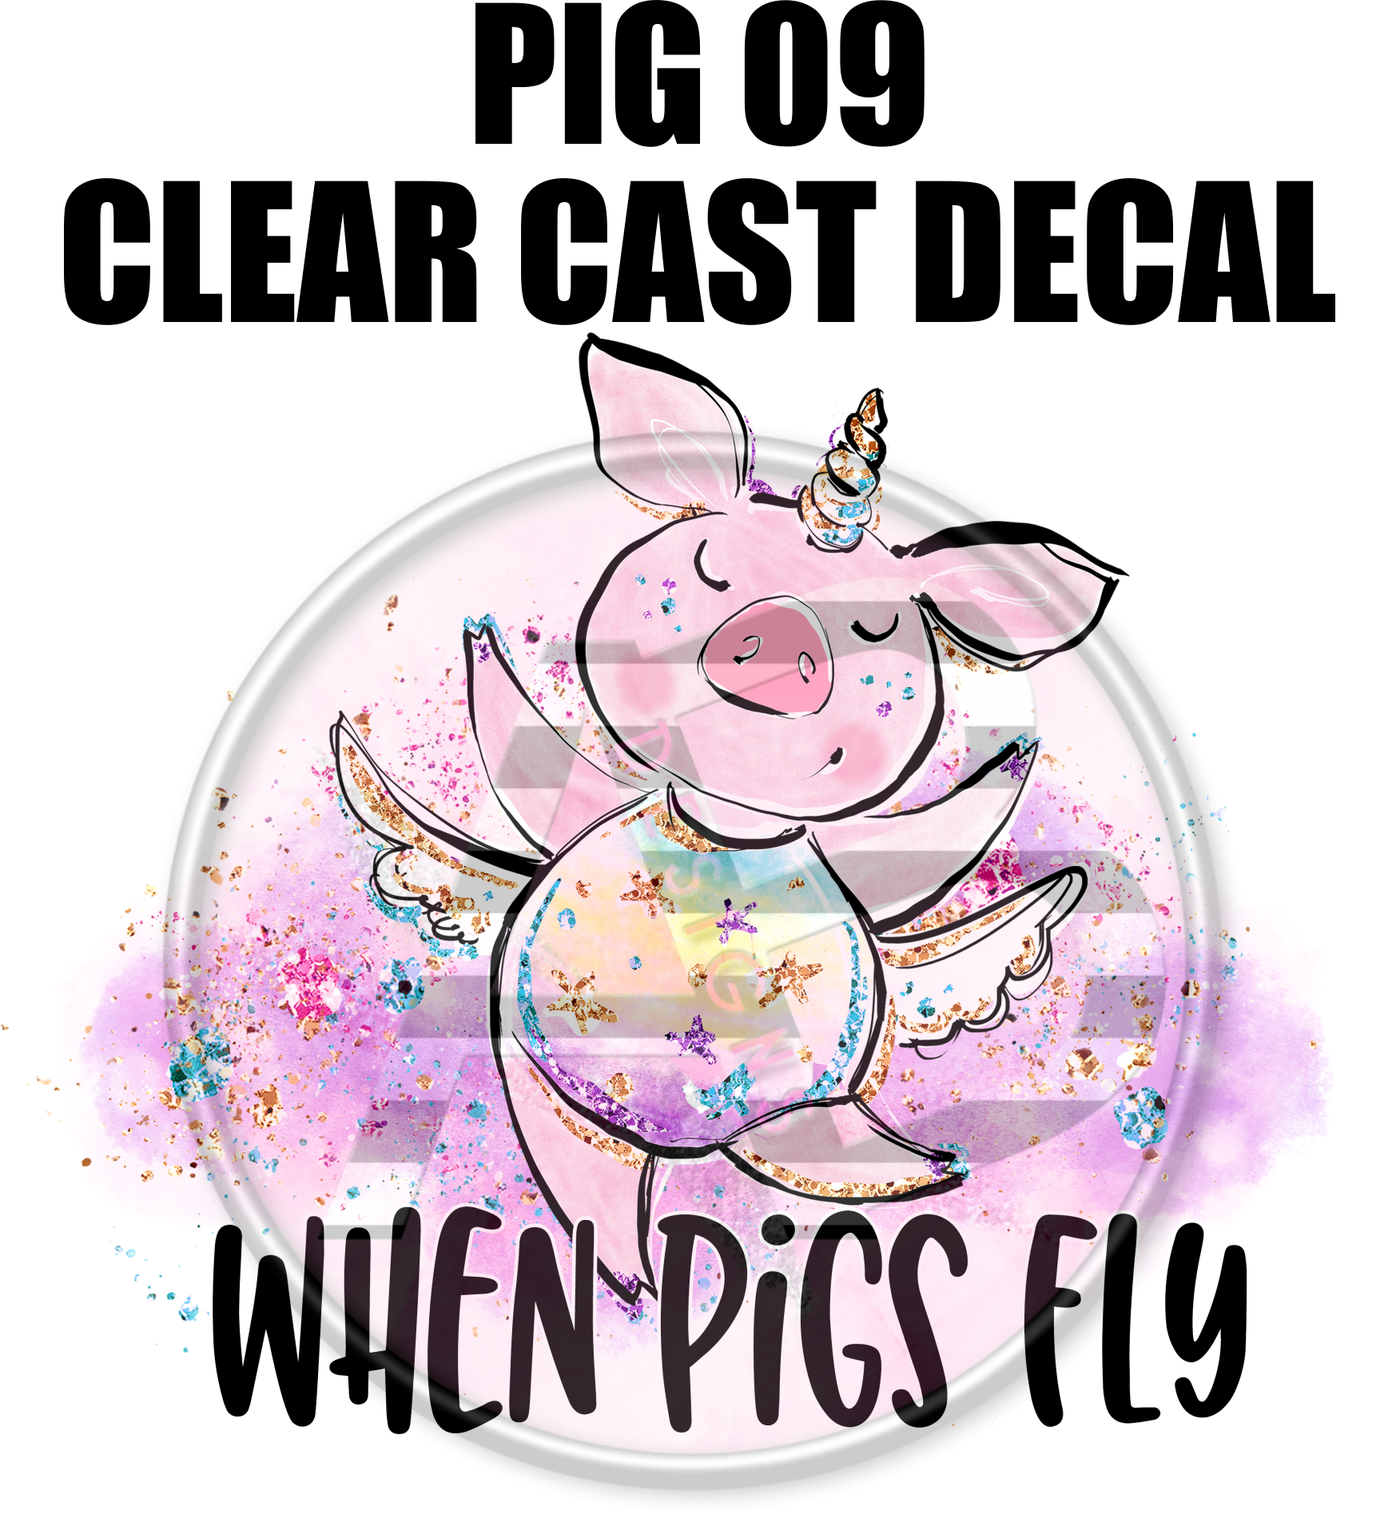 Pig 09 - Clear Cast Decal-431